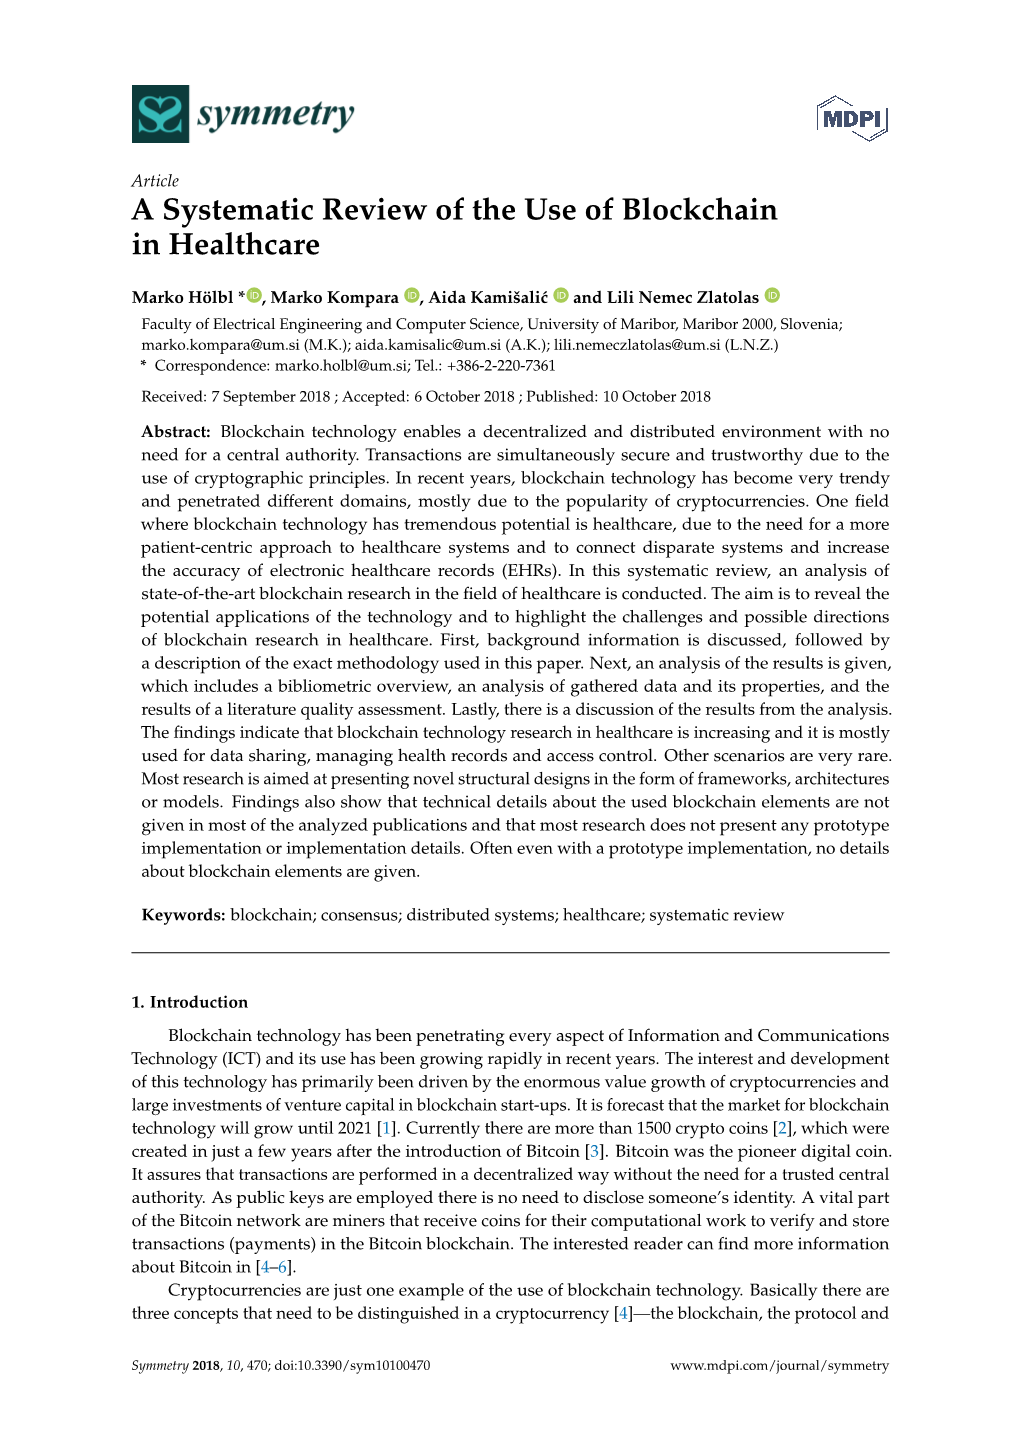 A Systematic Review of the Use of Blockchain in Healthcare